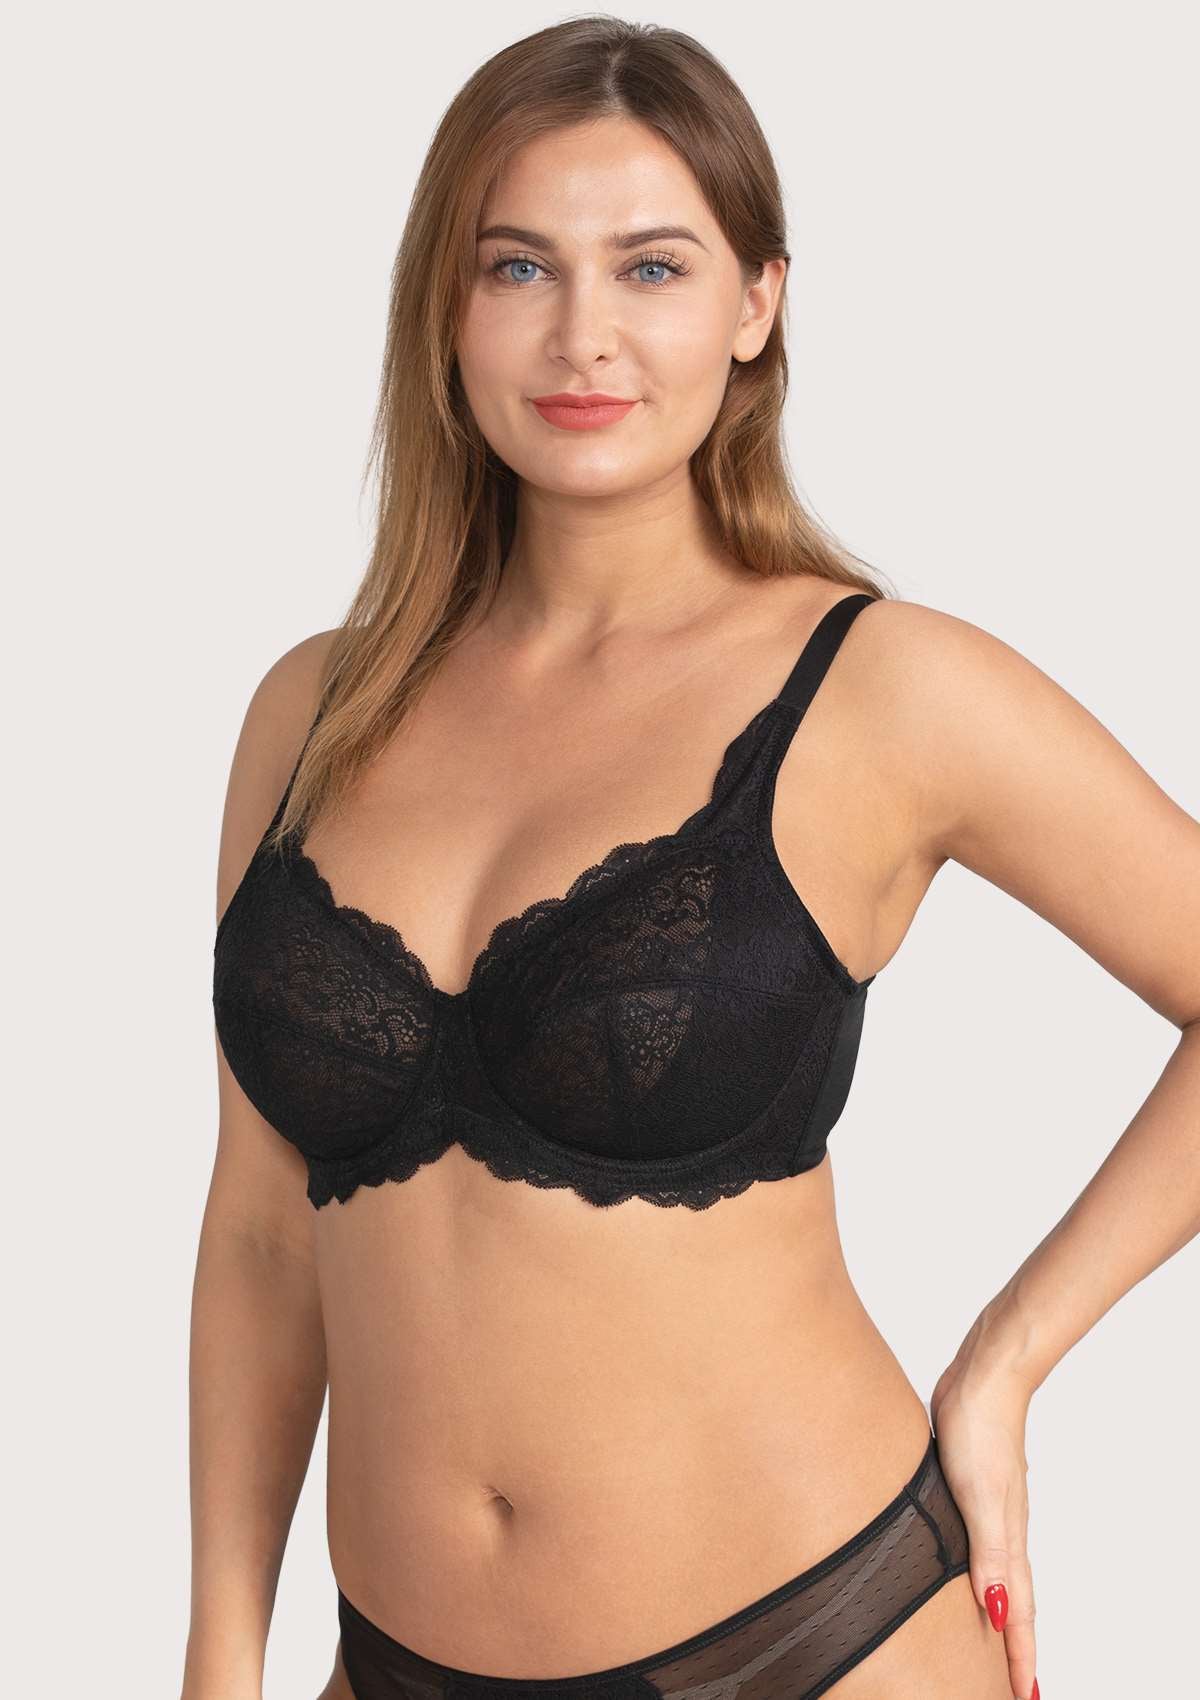 HSIA All-Over Floral Lace Unlined Bra: Minimizer Bra For Heavy Breasts - Black / 40 / DDD/F